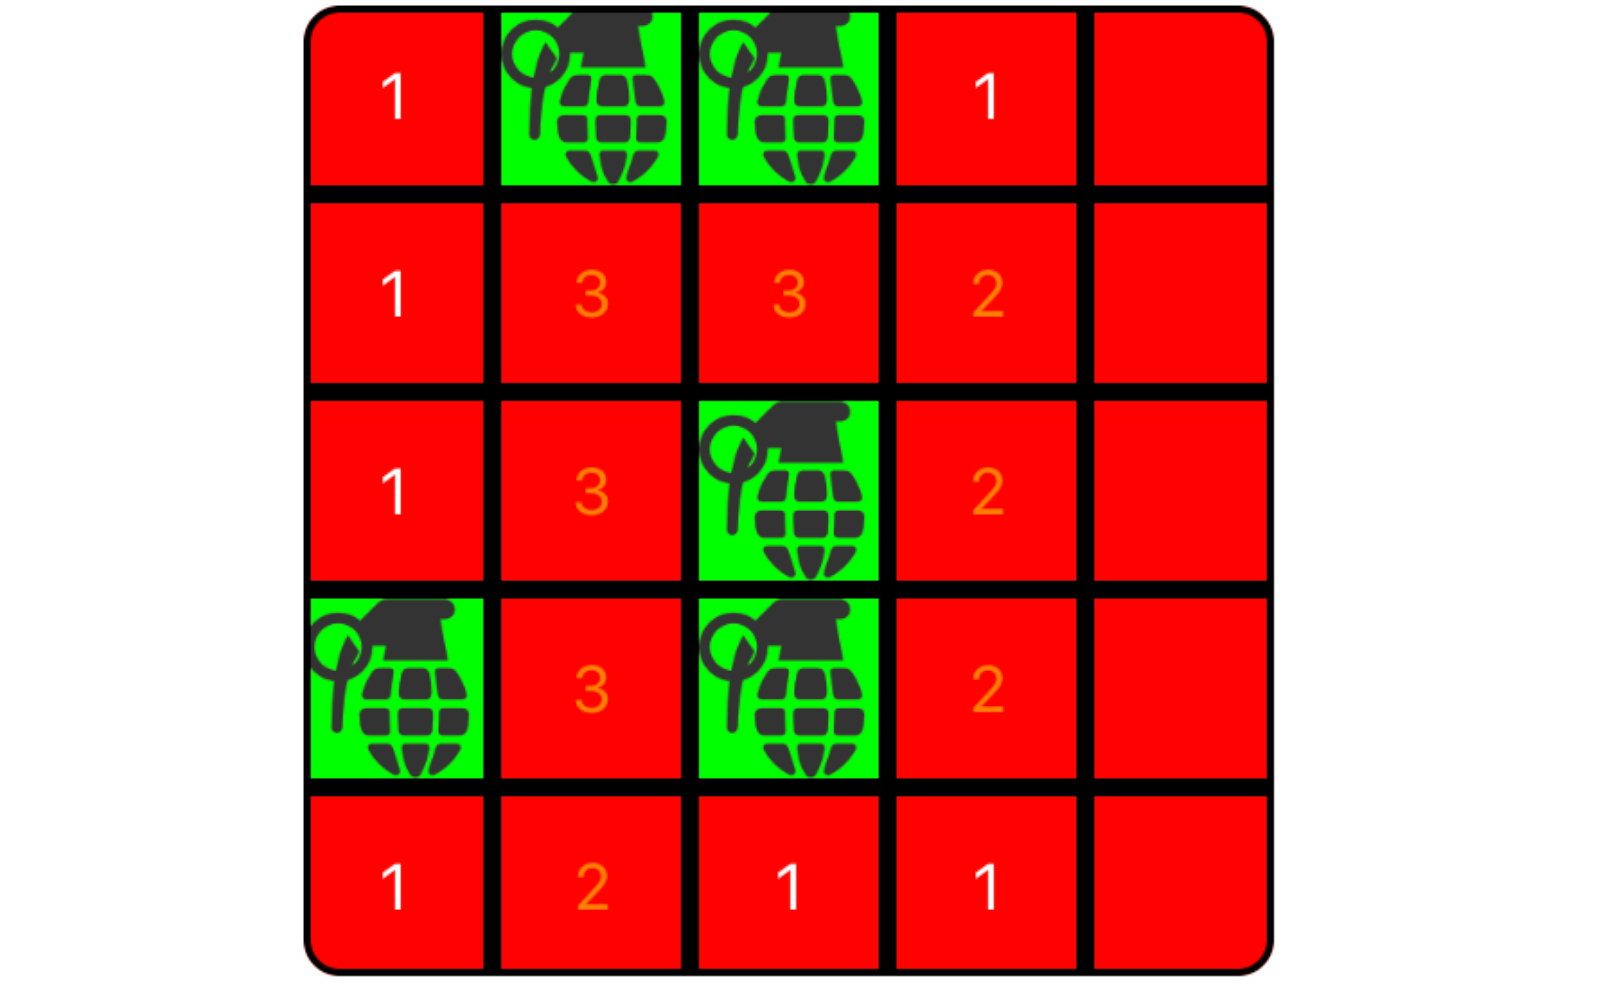 Rewriting a Minesweeper - Part 2